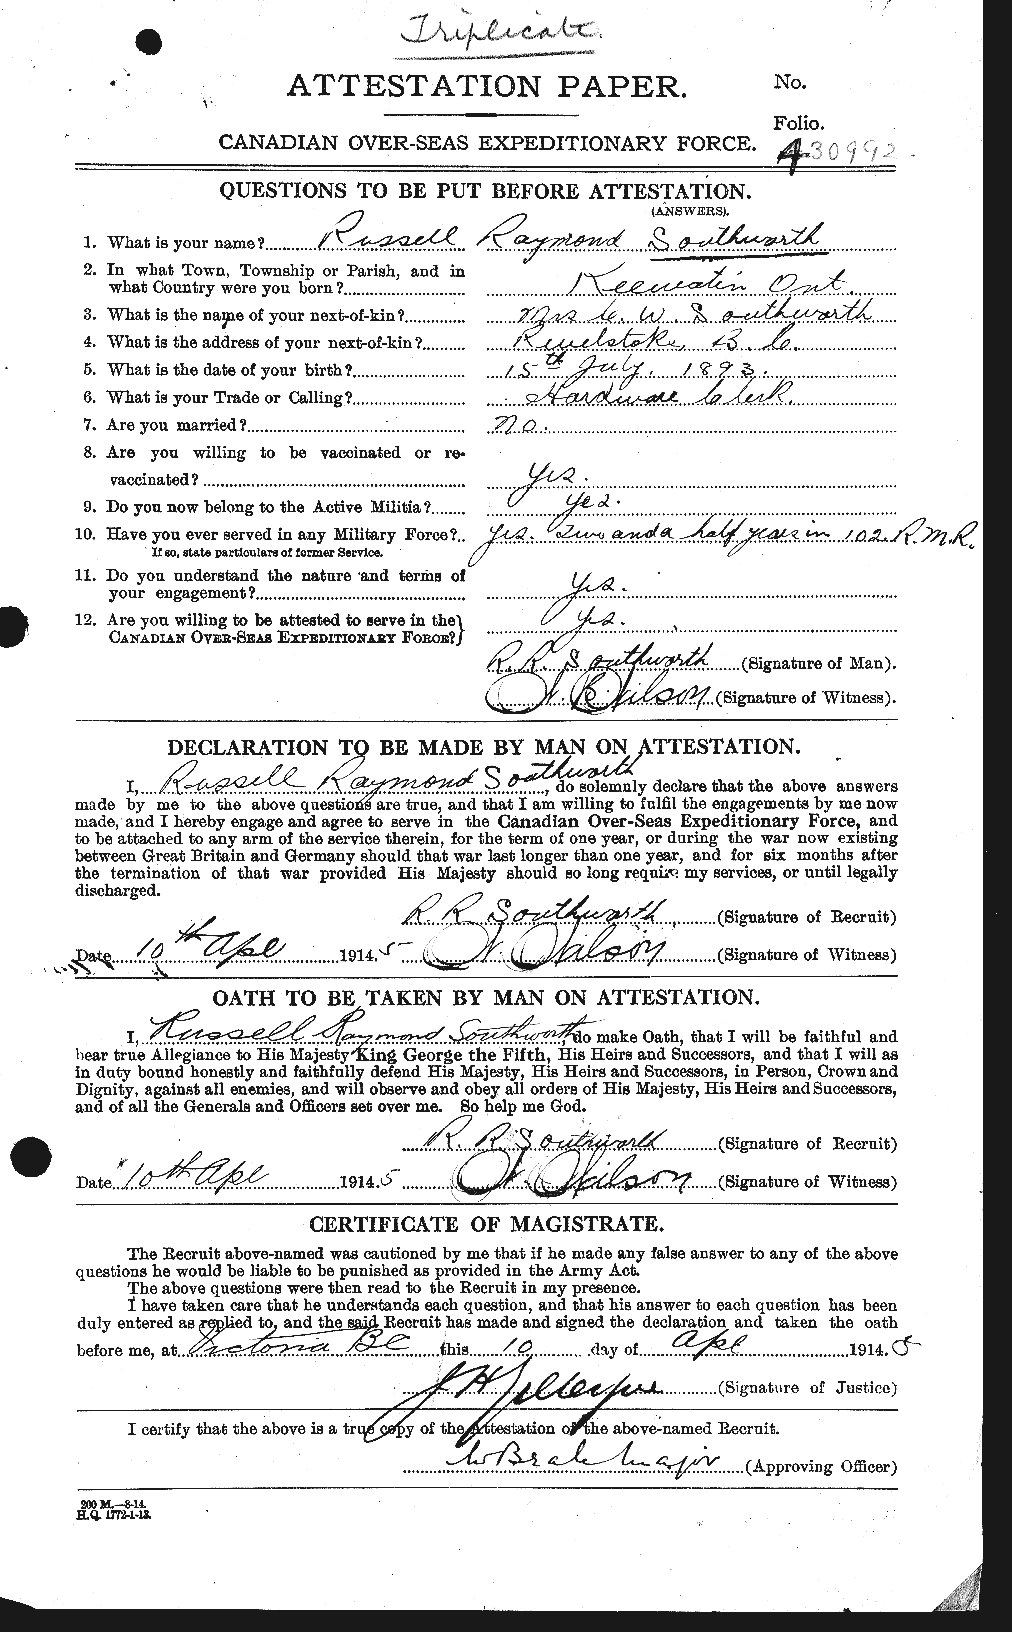 Personnel Records of the First World War - CEF 624322a